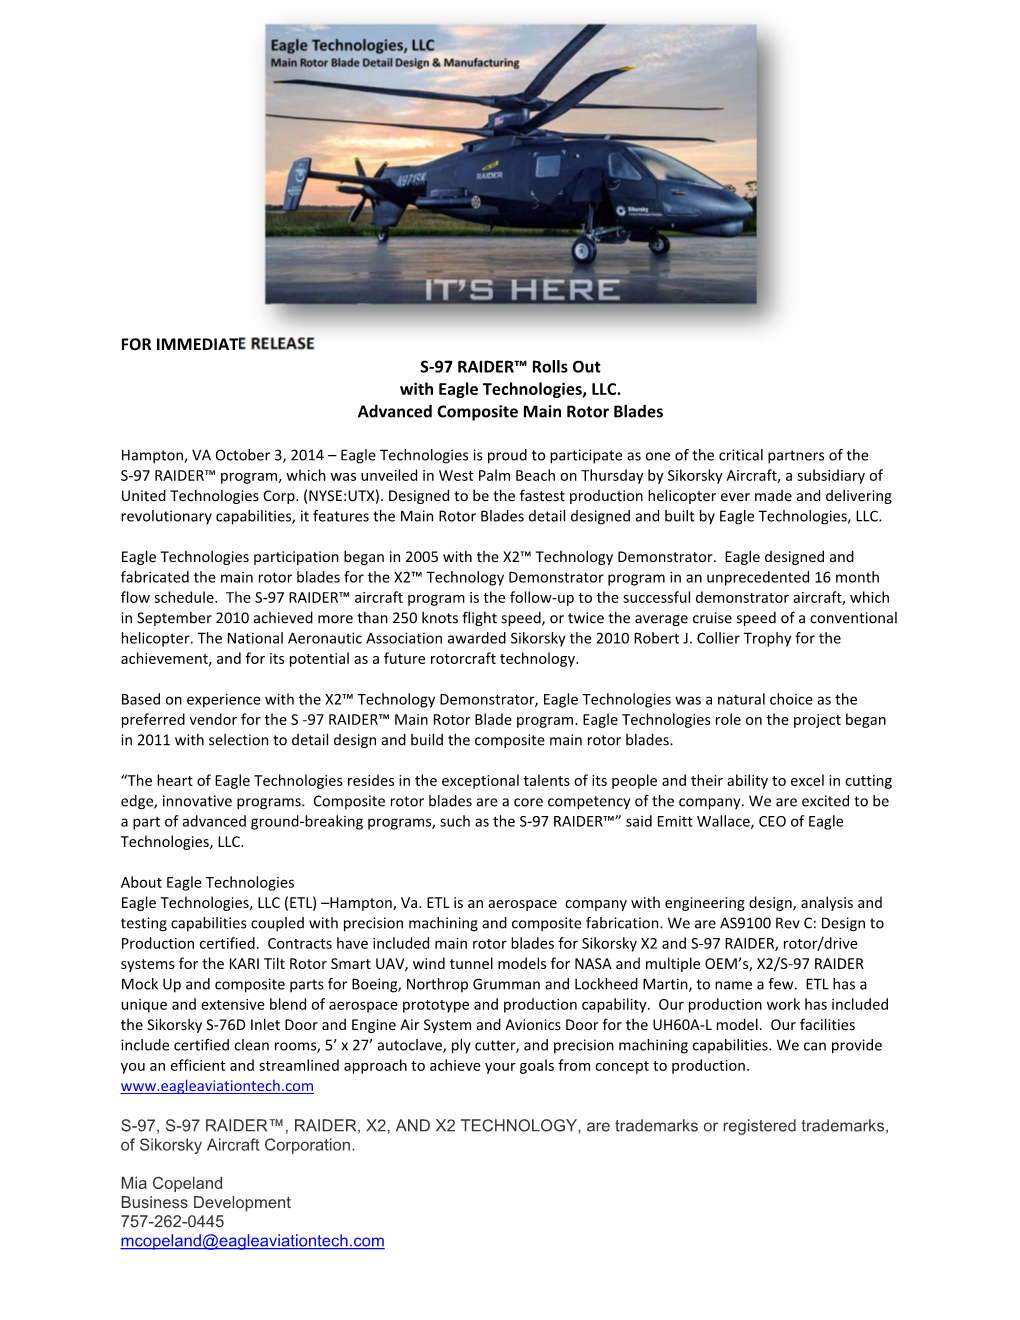 FOR IMMEDIATE RELEASE S-97 RAIDER™ Rolls out with Eagle